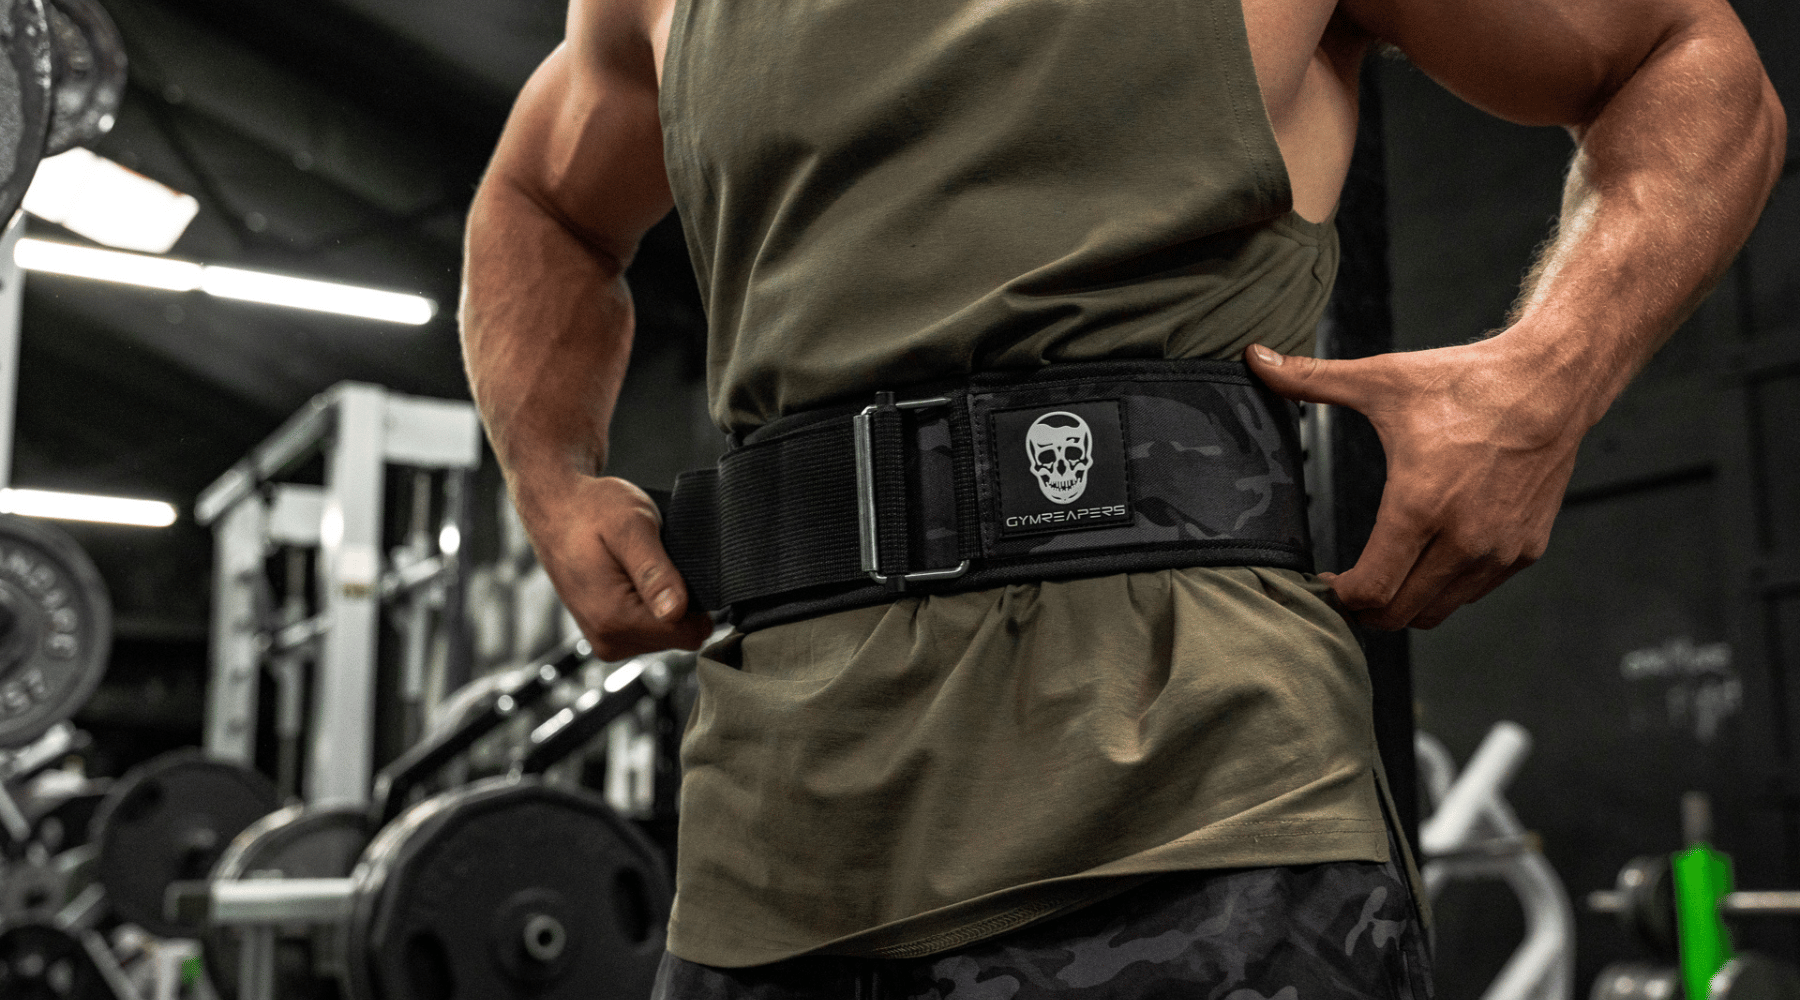 types of weightlifting belts